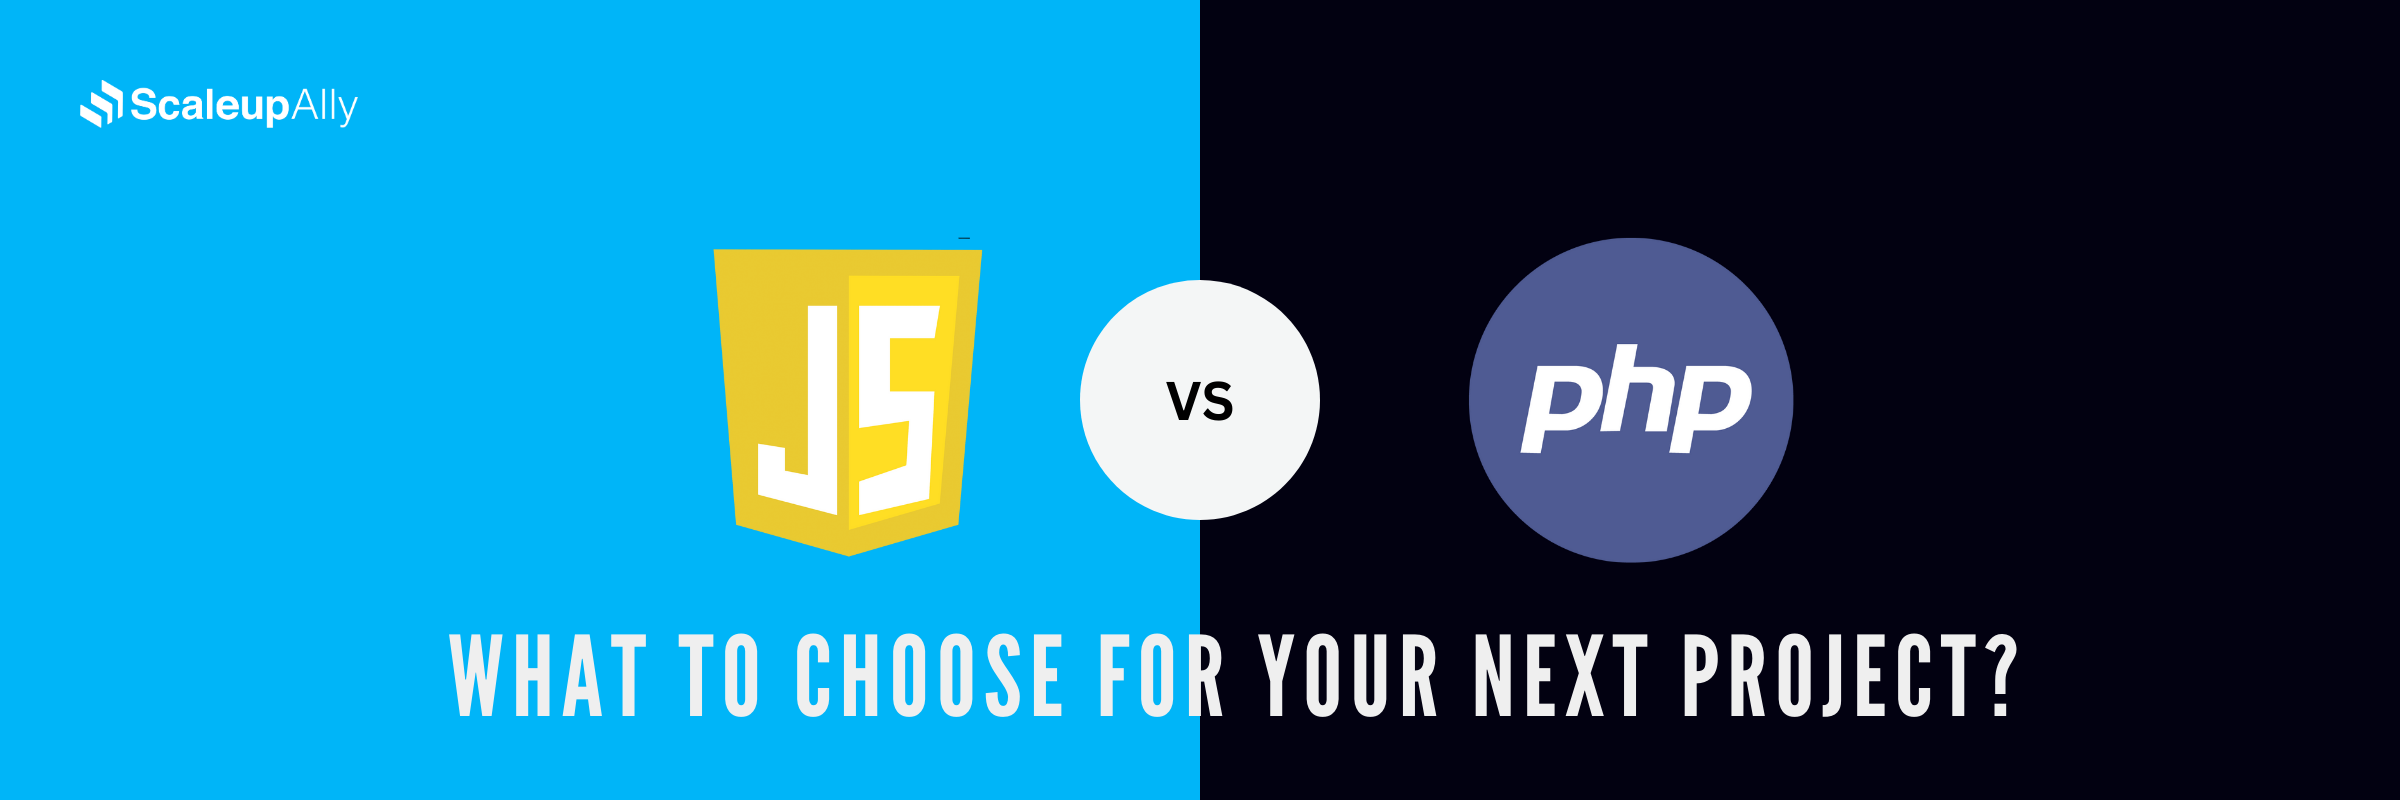 PHP vs JavaScript: What to choose for your next project?